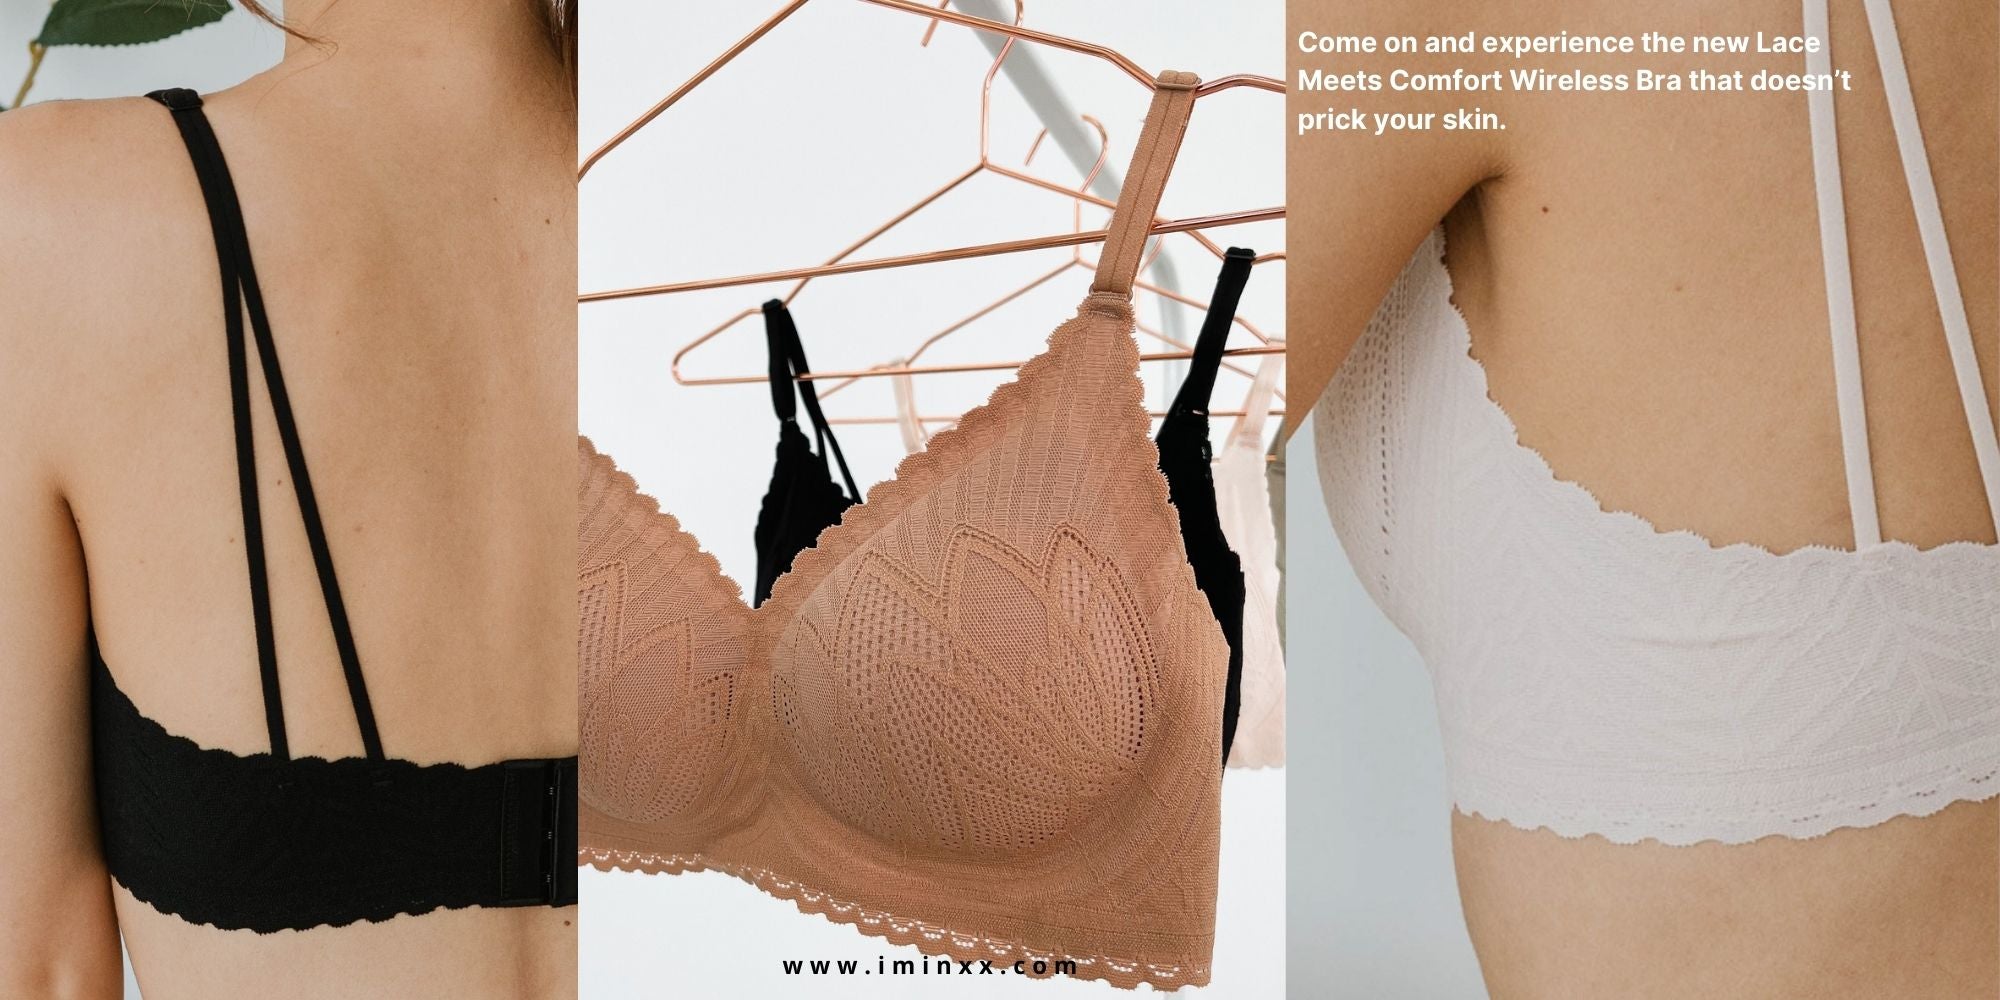 Lace Meets Comfort Seamless Wireless Bra Tagged 36A/80A